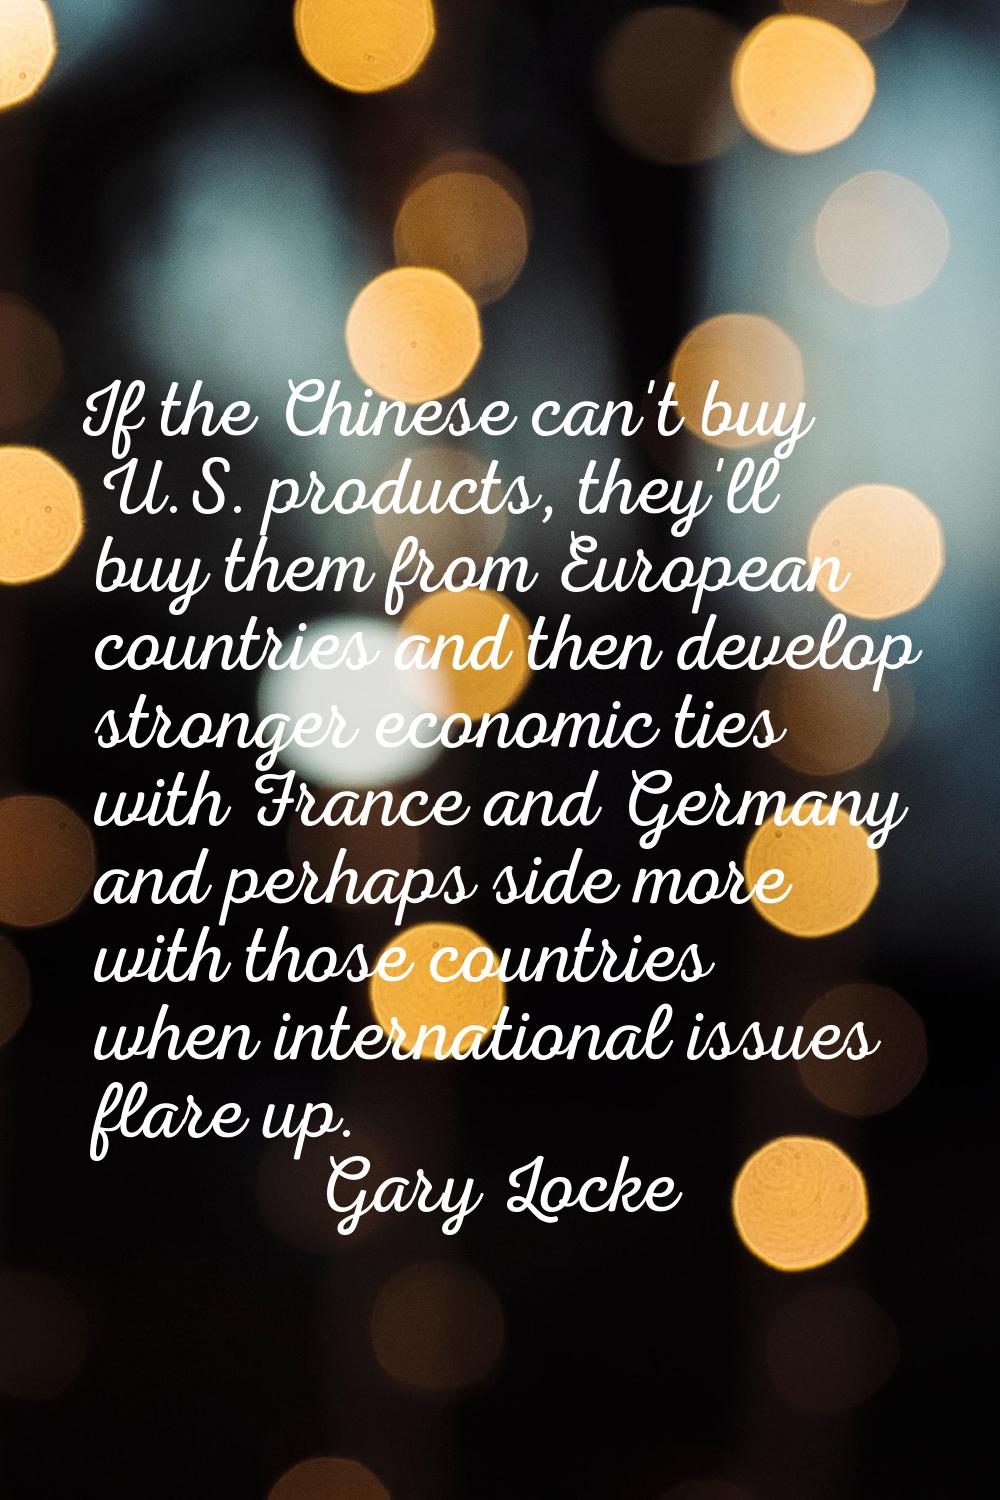 If the Chinese can't buy U.S. products, they'll buy them from European countries and then develop s